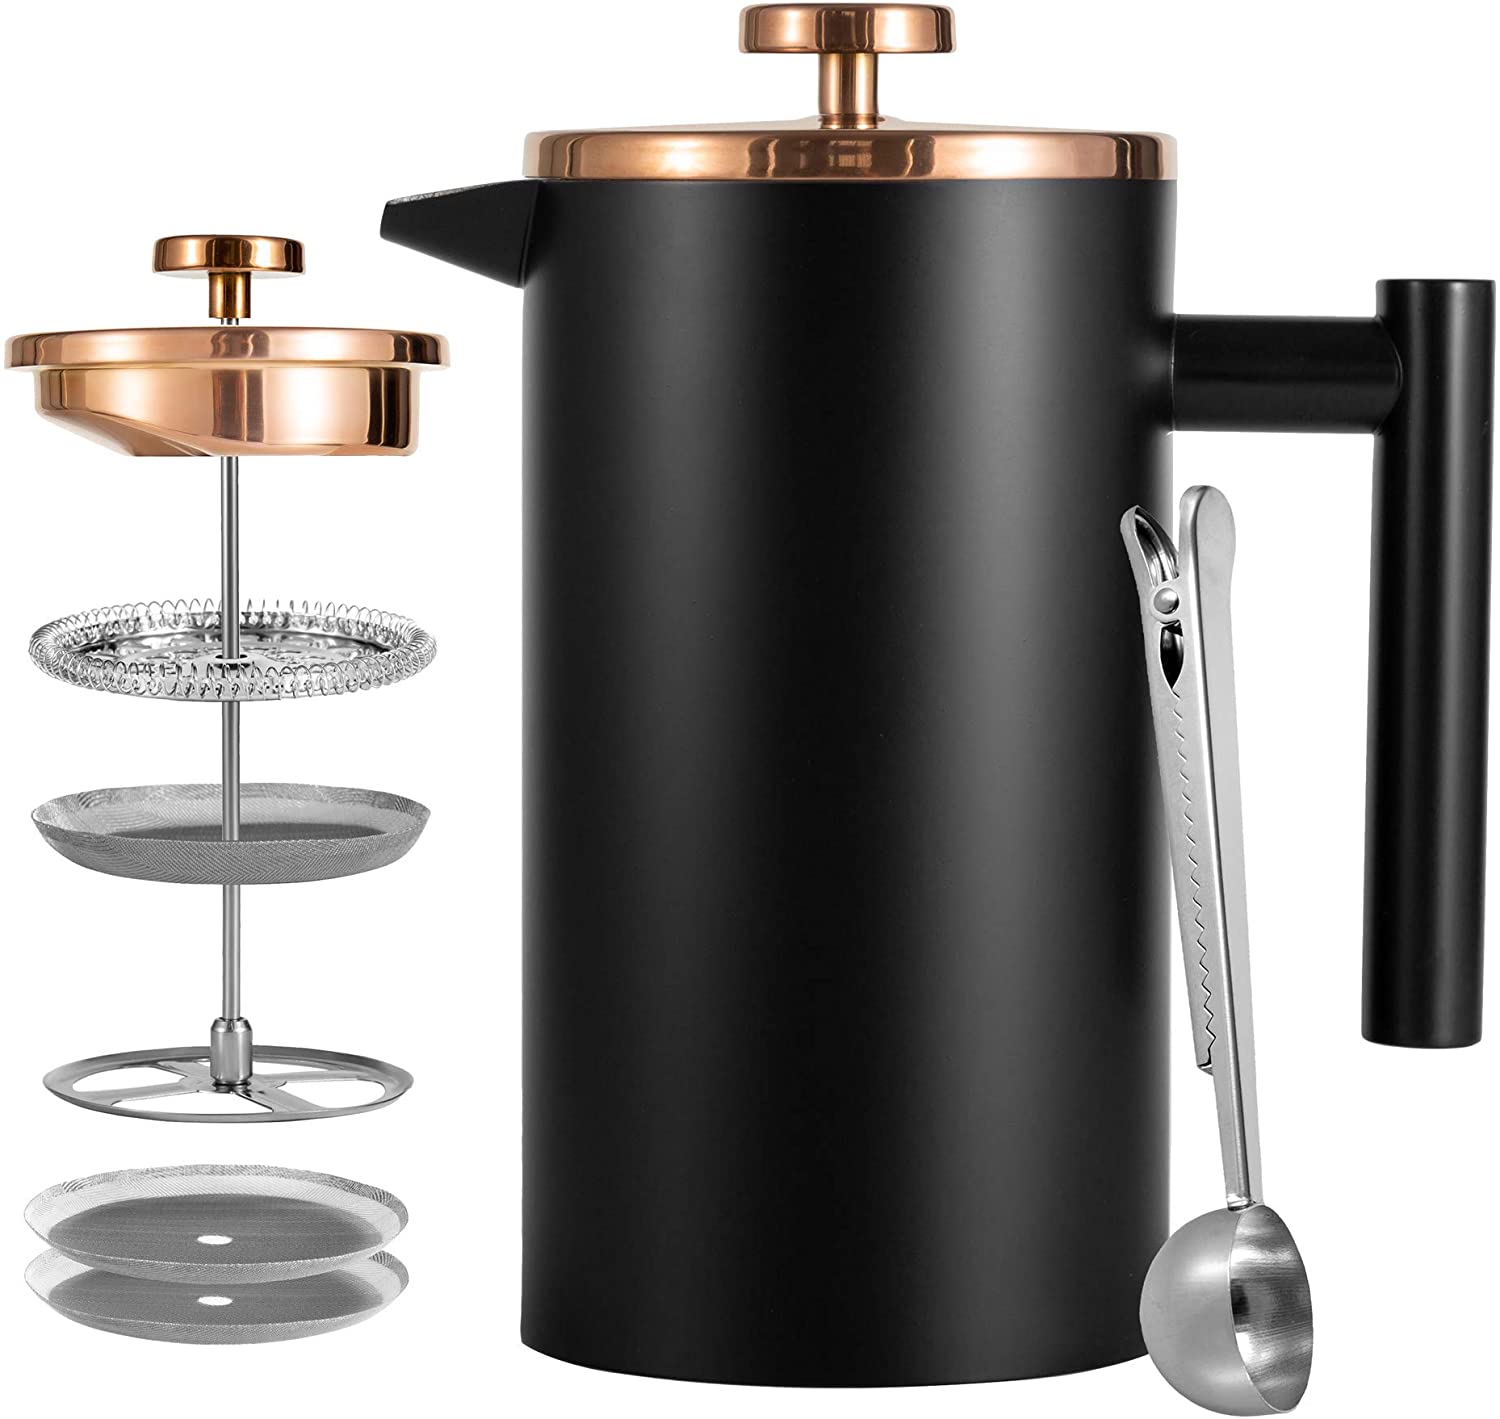 MeelioCafe Coffee Maker, French Press 1L Stainless Steel Coffee Press, Tea or Cafetiere Kettle, with 2 Additional Filter Sieves, Coffee Spoons, Black Rose Gold, Double-Walled Insulated Coffee Filter